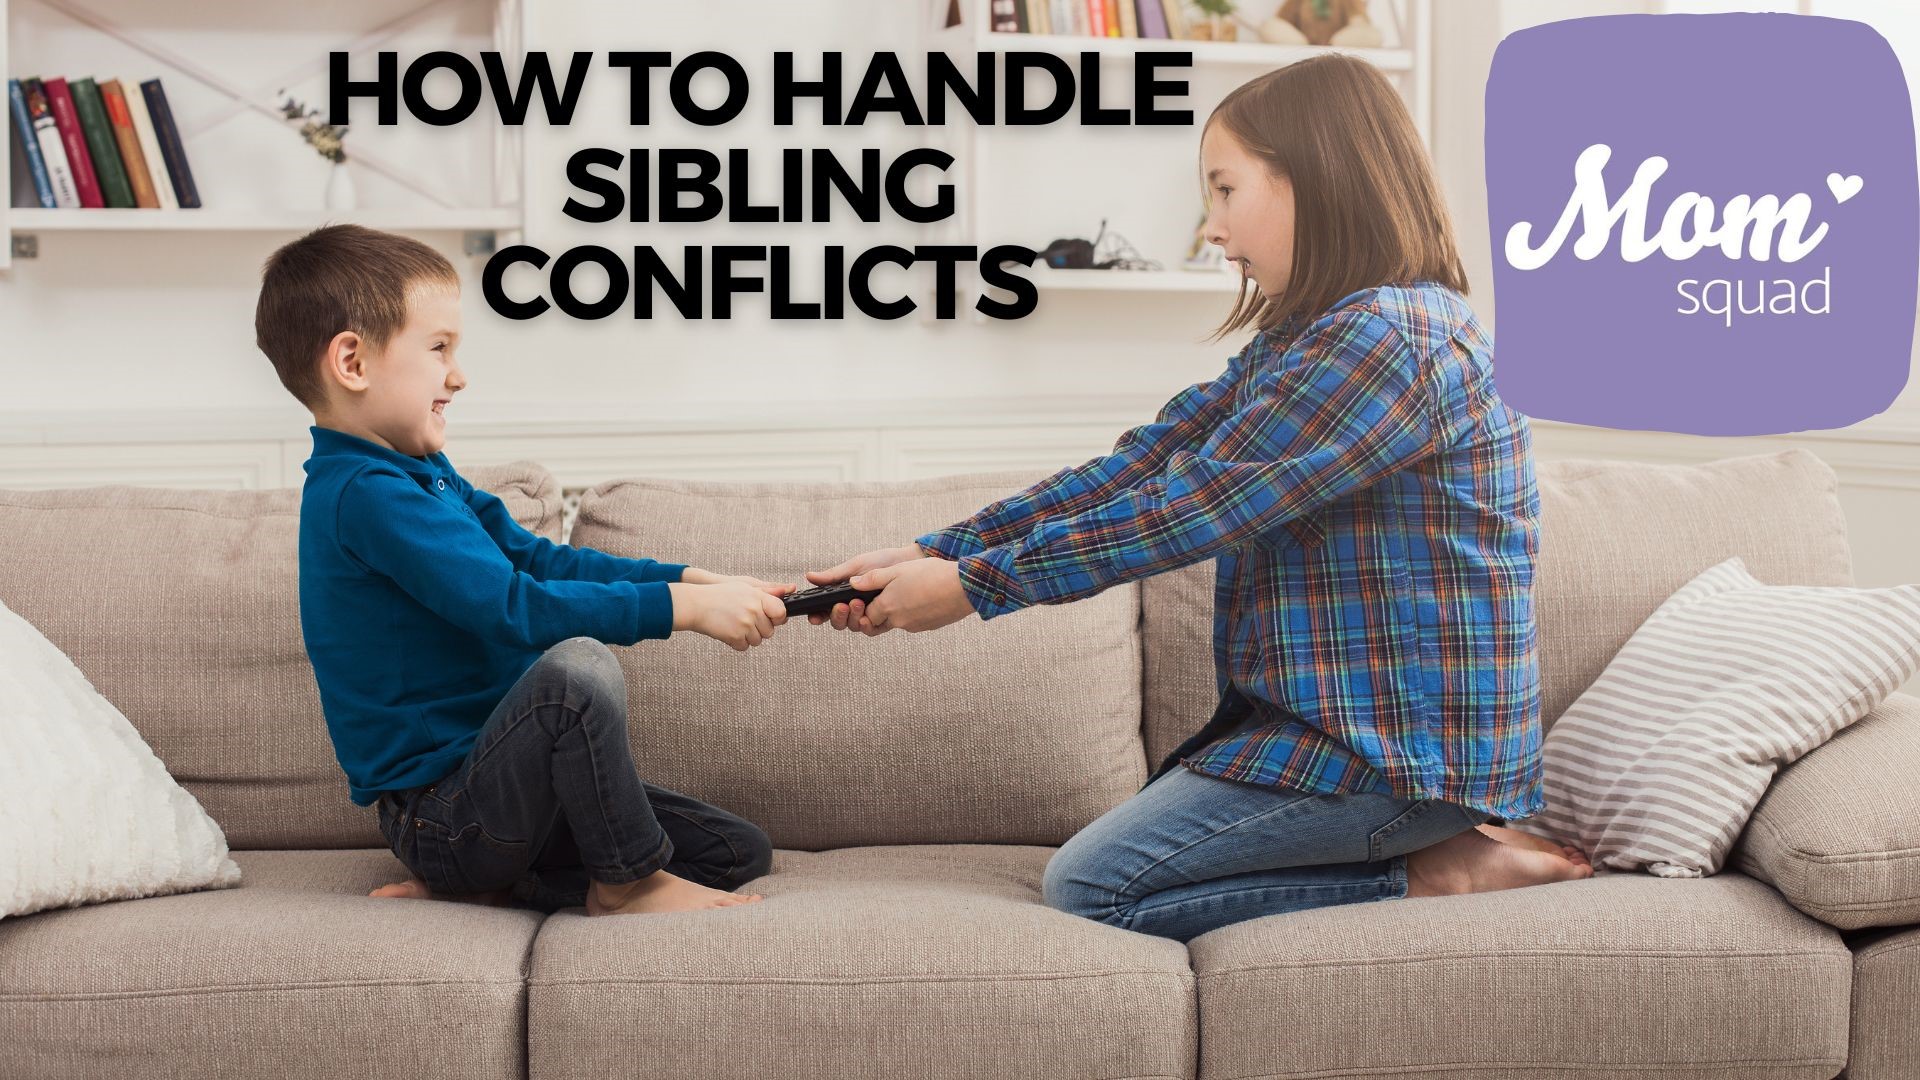 Maureen Kyle sits down with an expert from the Cleveland Clinic to discuss handling sibling conflict. How to handle punishments and teach conflict resolution.